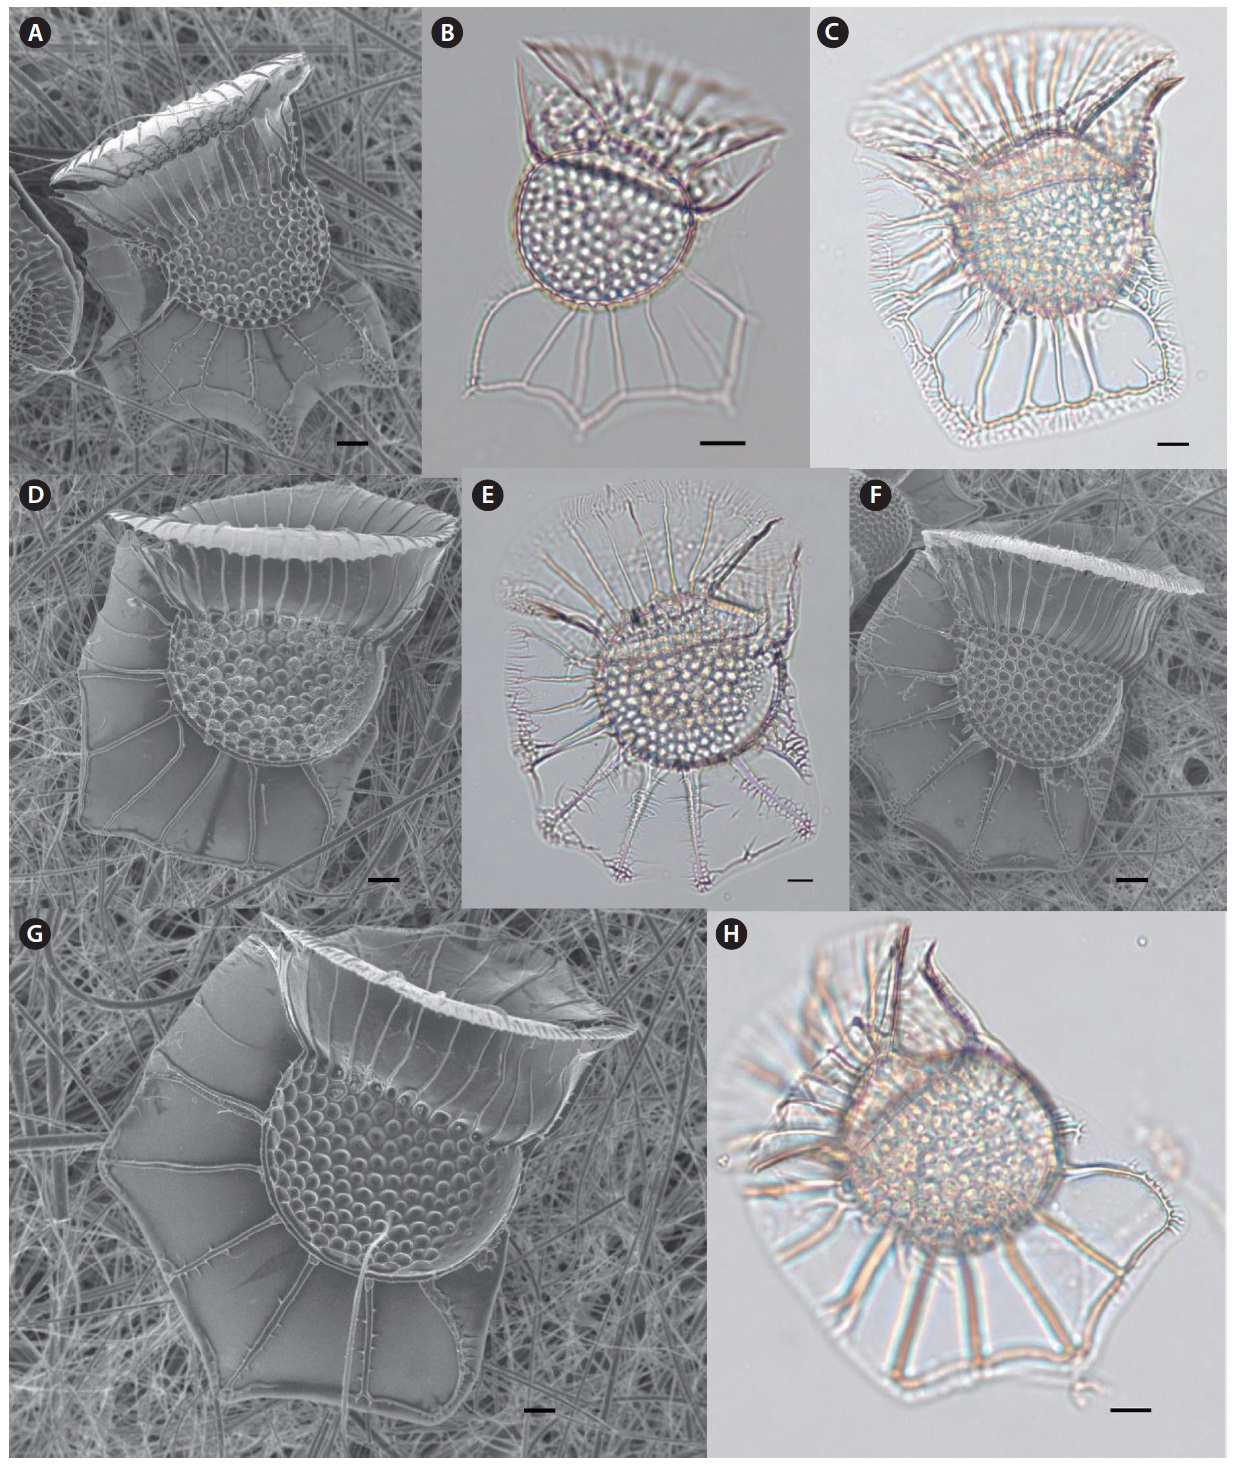 Light microscopy (LM) and scanning electron microscopy (SEM). (A) Ornithocercus magnificus (SEM), lateral view, (B) O. magnificus (LM), (C) Ornithocercus quadratus (LM), (D) O. quadratus (SEM), (E) Ornithocercus steinii (LM), (F) O. steinii (SEM), (G) Ornithocercus thumii (SEM), (H) O. thumii (LM). Scale bars,10 μm.